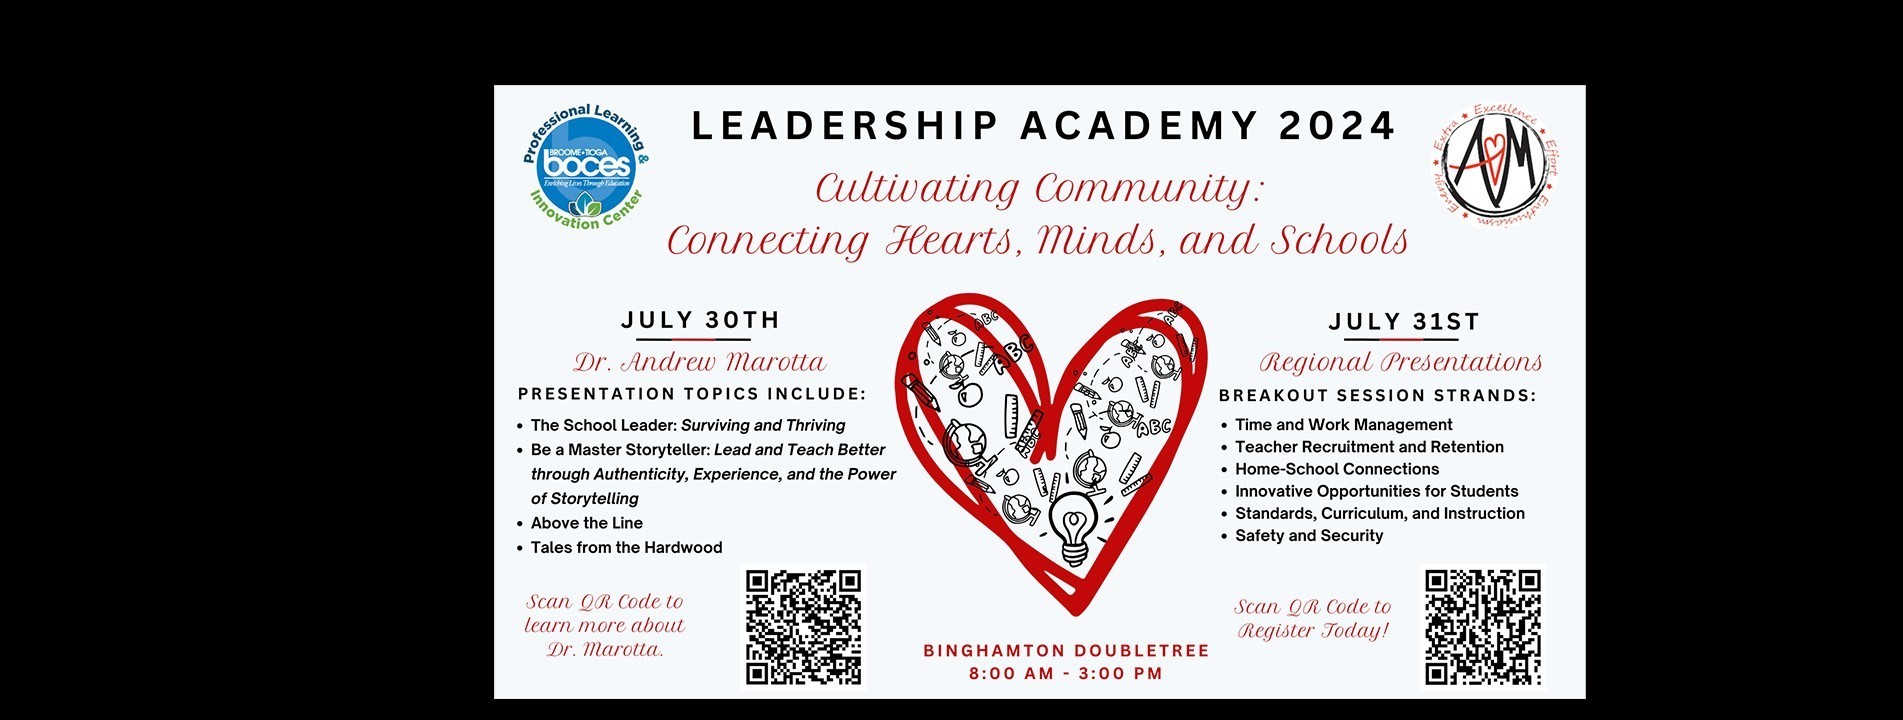 Leadership Academy 2024. Cultivating Community: Connecting Hearts, Minds, and Schools. July 30th: Dr. Andrew Marotta. Presentation topics include: - The School Leader: Surviving and Thriving; Be A Master Storyteller: Lead and Teach better through Authenticity, Experience, and the Power of Storytelling; Above the Line; Tales from the Hardwood. July 31st: Regional Presentations. Breakout Session Strands: -Time and Work Management; Teacher Recruitment and Retention; Home-School Connections; Innovative Opportunities for Students; Standards, Curriculum, and Instruction; Safety and Security. Location: Binghamton DoubleTree; 8 am - 3 pm.